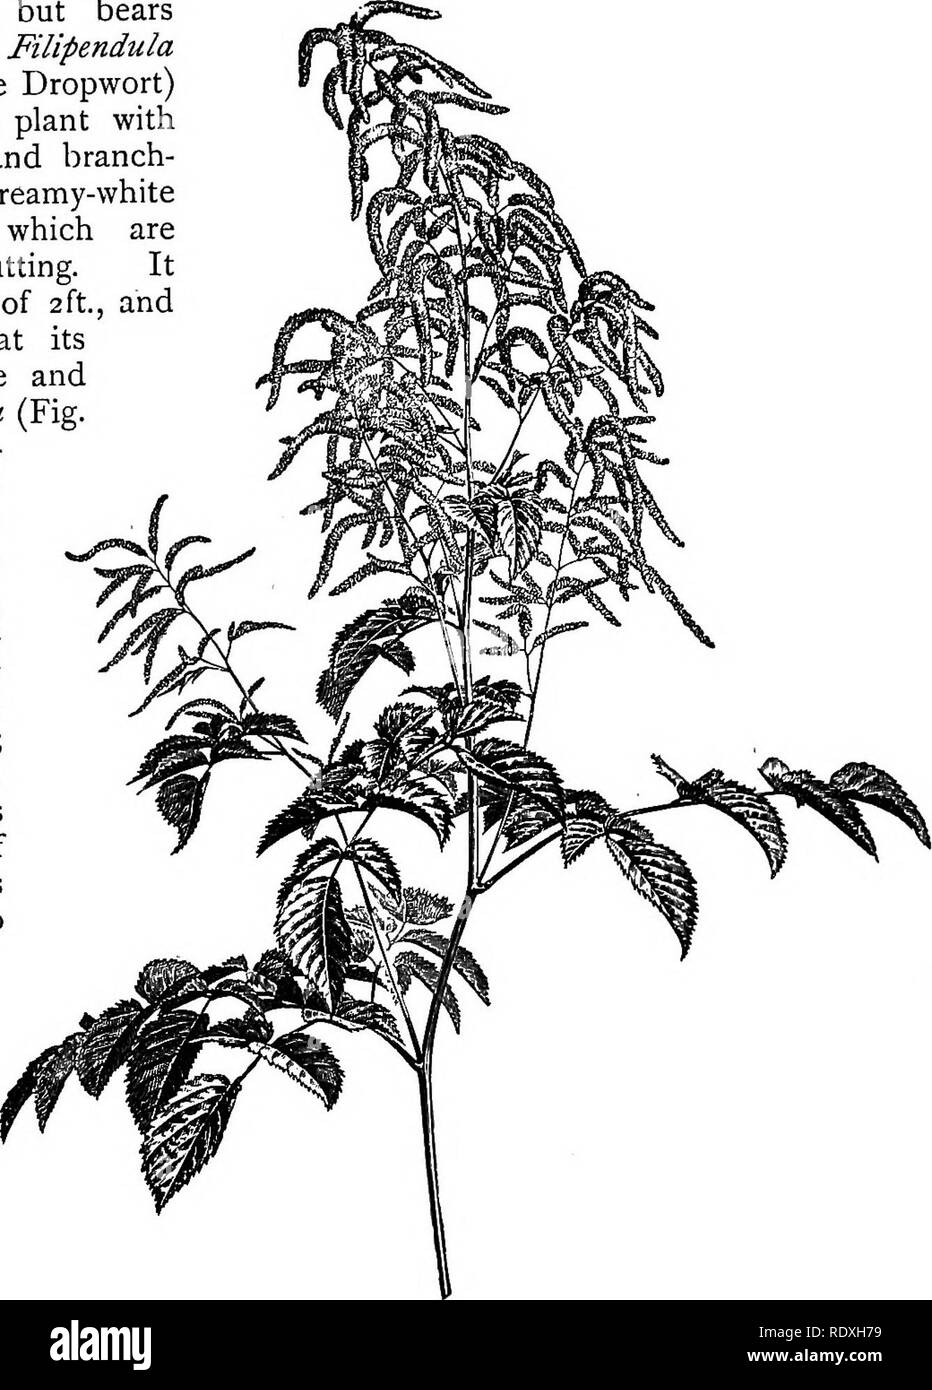 . The Book of gardening; a handbook of horticulture. Gardening; Horticulture. ON HARDY HERBACEOUS PERENNIALS. 283 or border culture; it grows upwards of 3ft. high, and from June to August produces dense plumes of feathery white flowers. The variety floribunda is rather dwarf in habit, but bears larger plumes. S. Filipendula flore-pleno (Double Dropwort) is a low-growing plant with fern-like foliage and branch- ing panicles of creamy-white double flowers, which are suitable for cutting. It reaches a height of 2 ft., and is to be seen at its best during June and July. S. palmata (Fig. 165) is a  Stock Photo